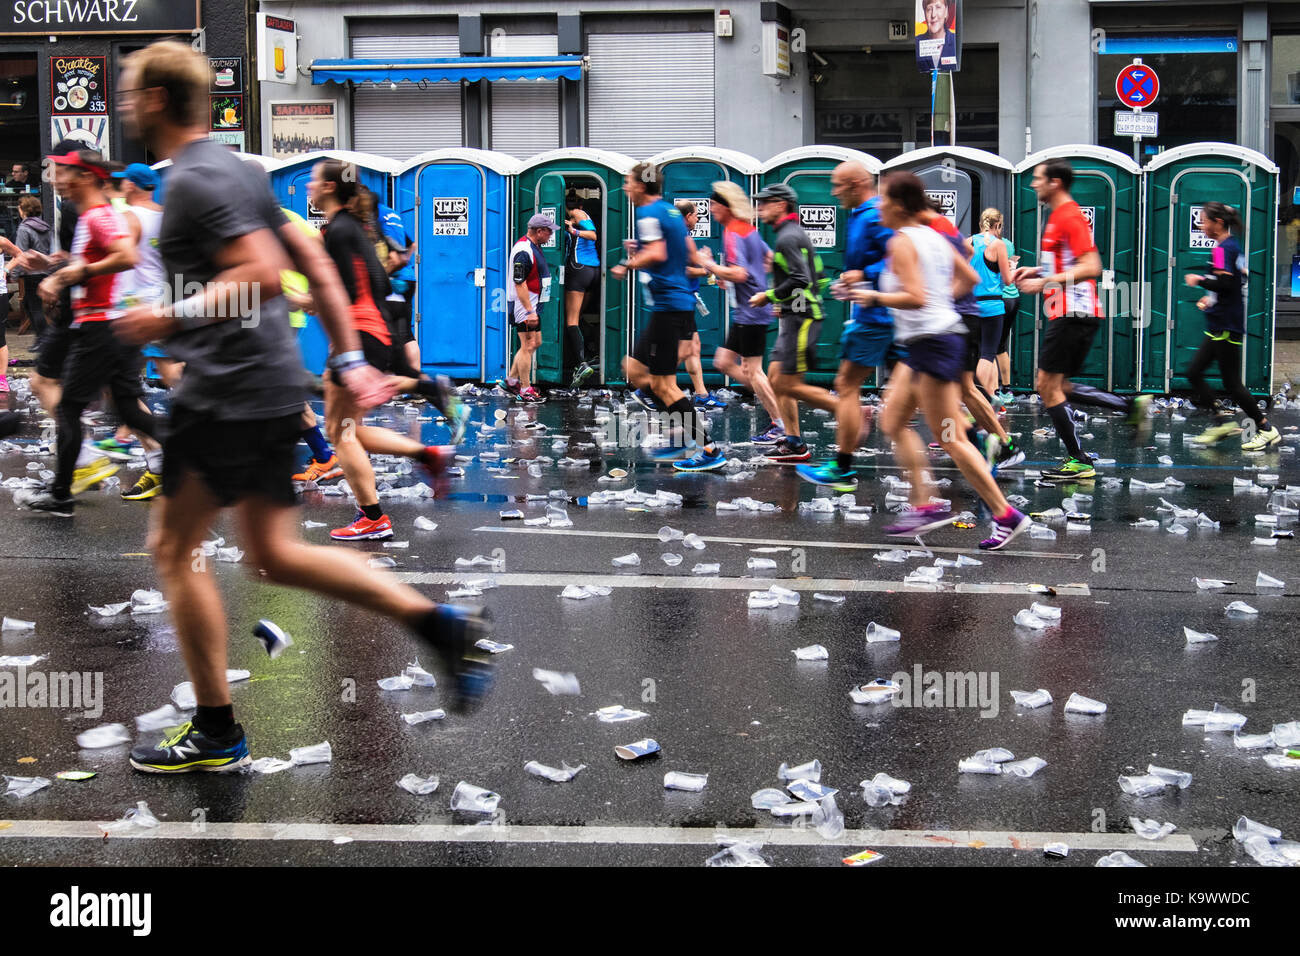 Berlin, Germany, 24th September, 2017. Toilets for runners. Athletes  competing in the Berlin Marathon reach the 10 Kilometer mark at  Rosenthalerplatz. The wet weather did nor appear to dampen the spirits of